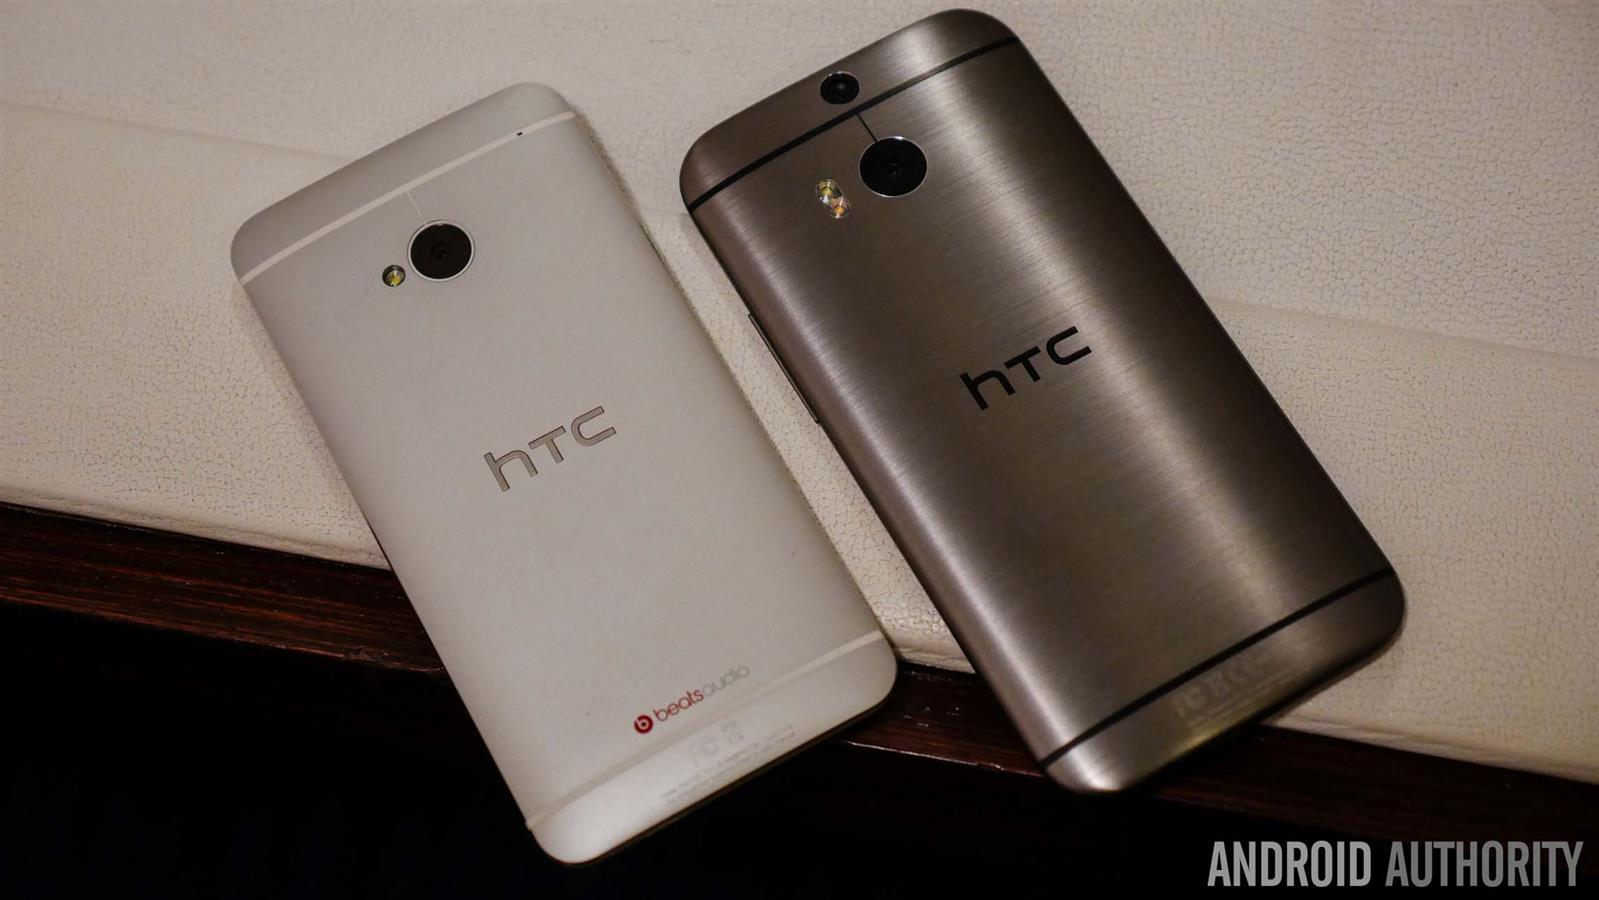 htc-one-m8-vs-htc-one-m7-quick-look-aa-1-of-191